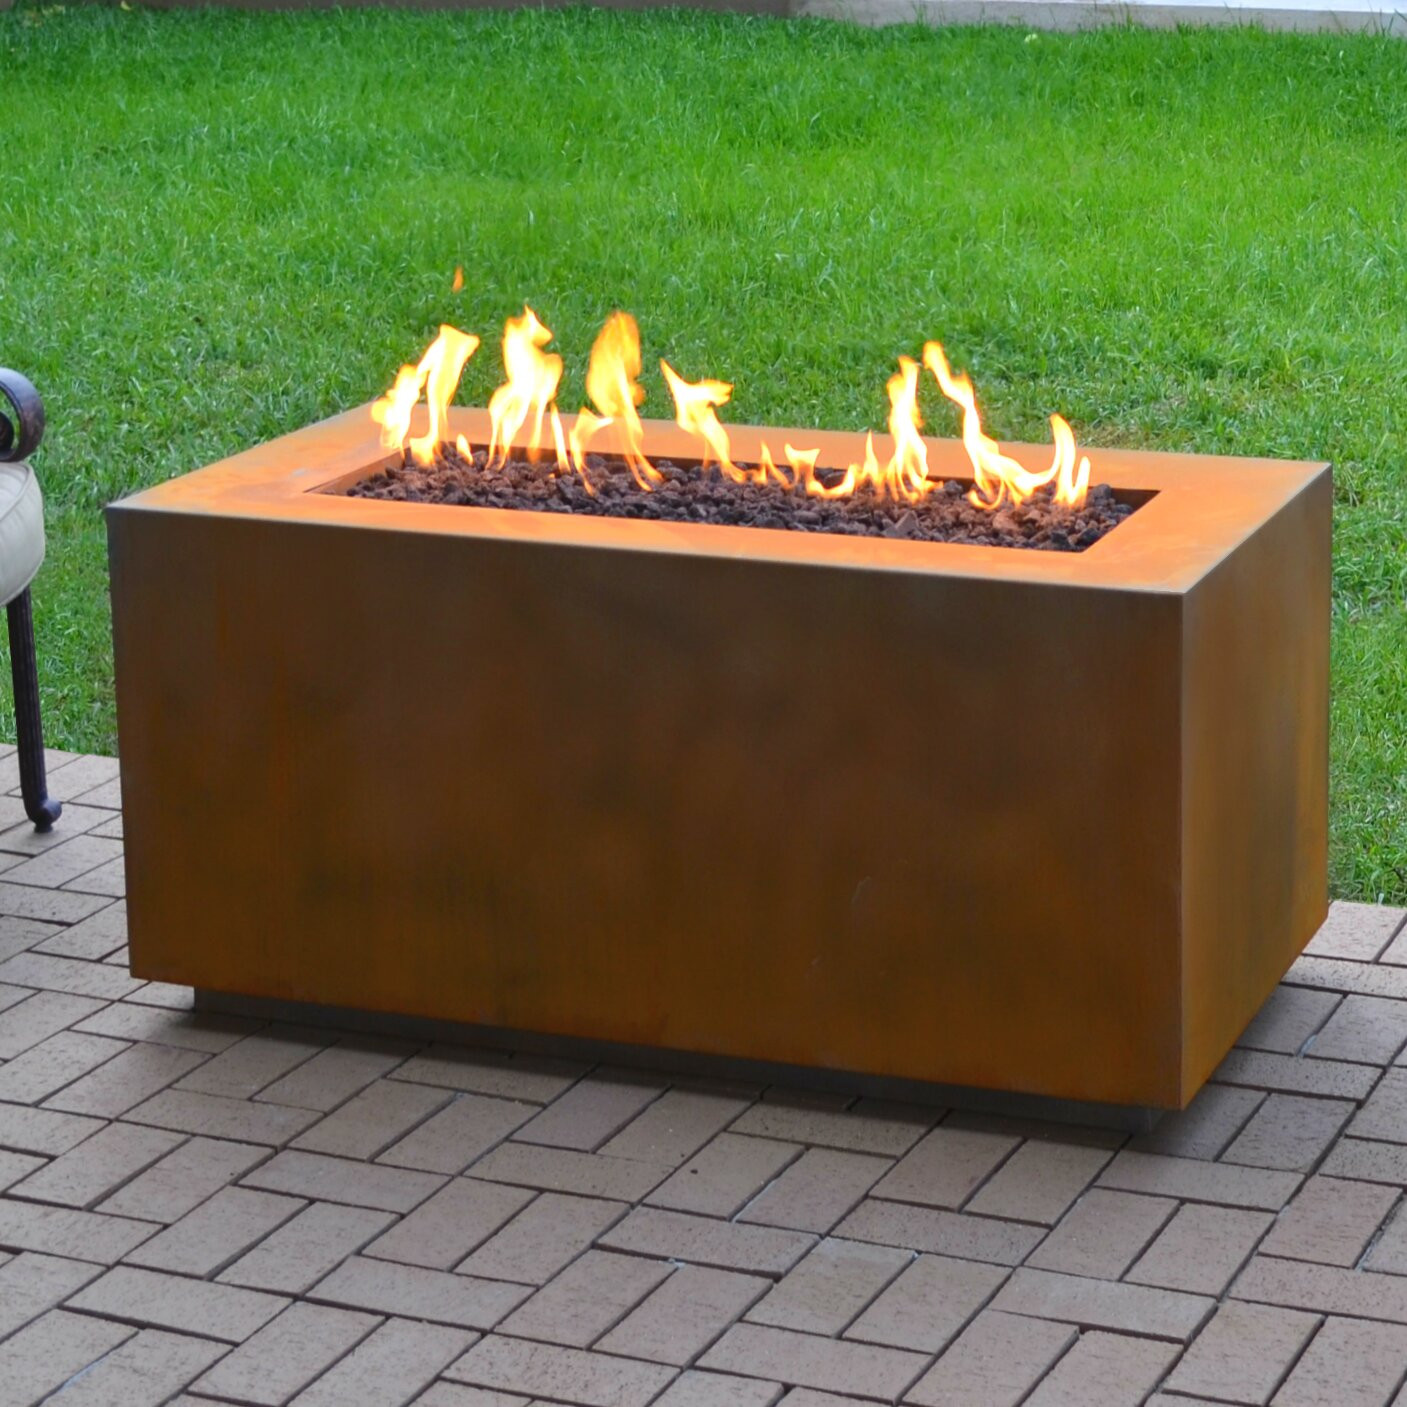 Propane Patio Fire Pit
 The Outdoor Plus Corten Steel Propane Fire Pit Table